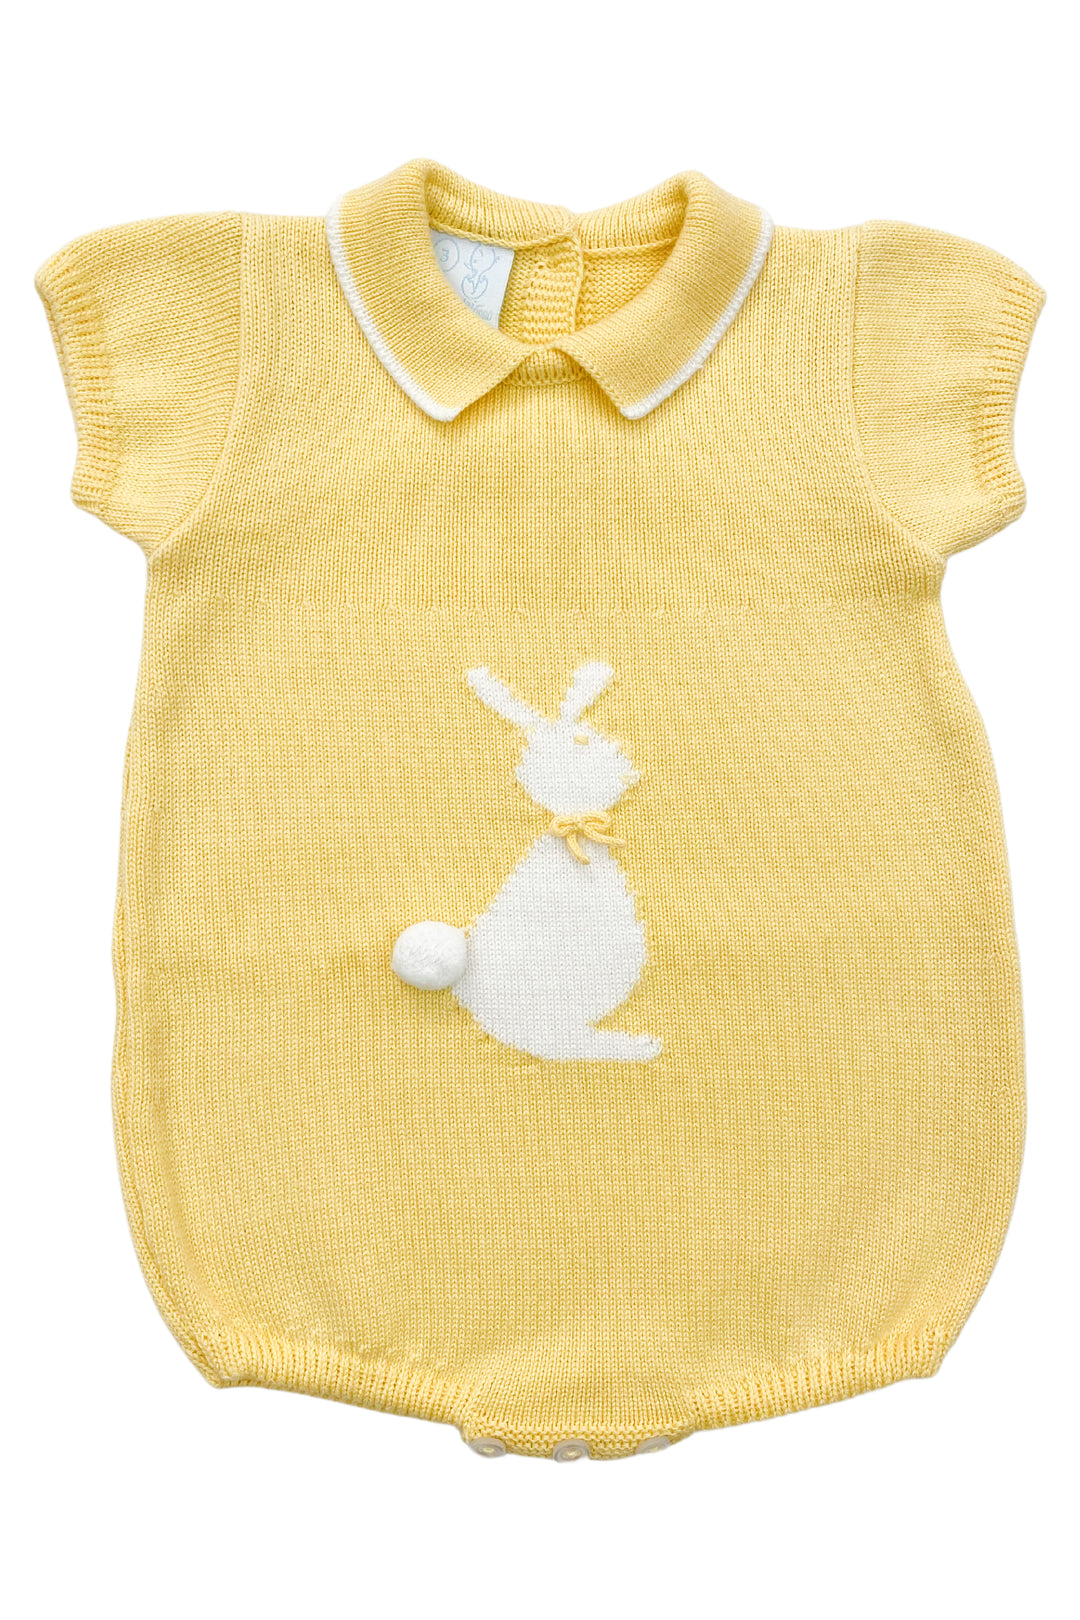 Granlei "Santi" Pale Yellow Knit Bunny Romper | iphoneandroidapplications